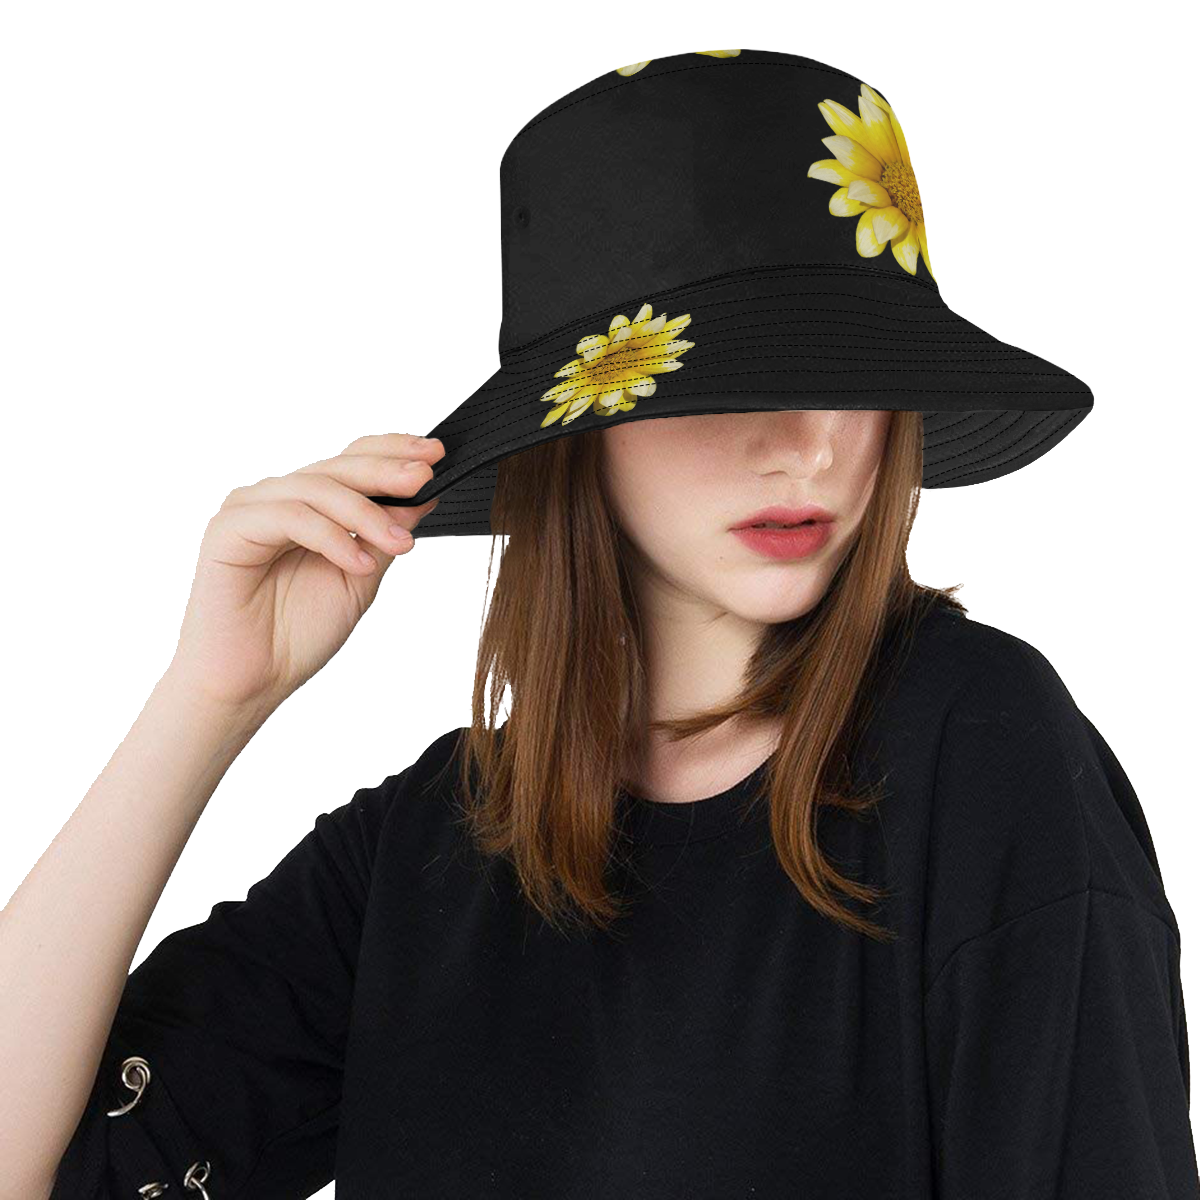 Yellow Flower, floral photography All Over Print Bucket Hat